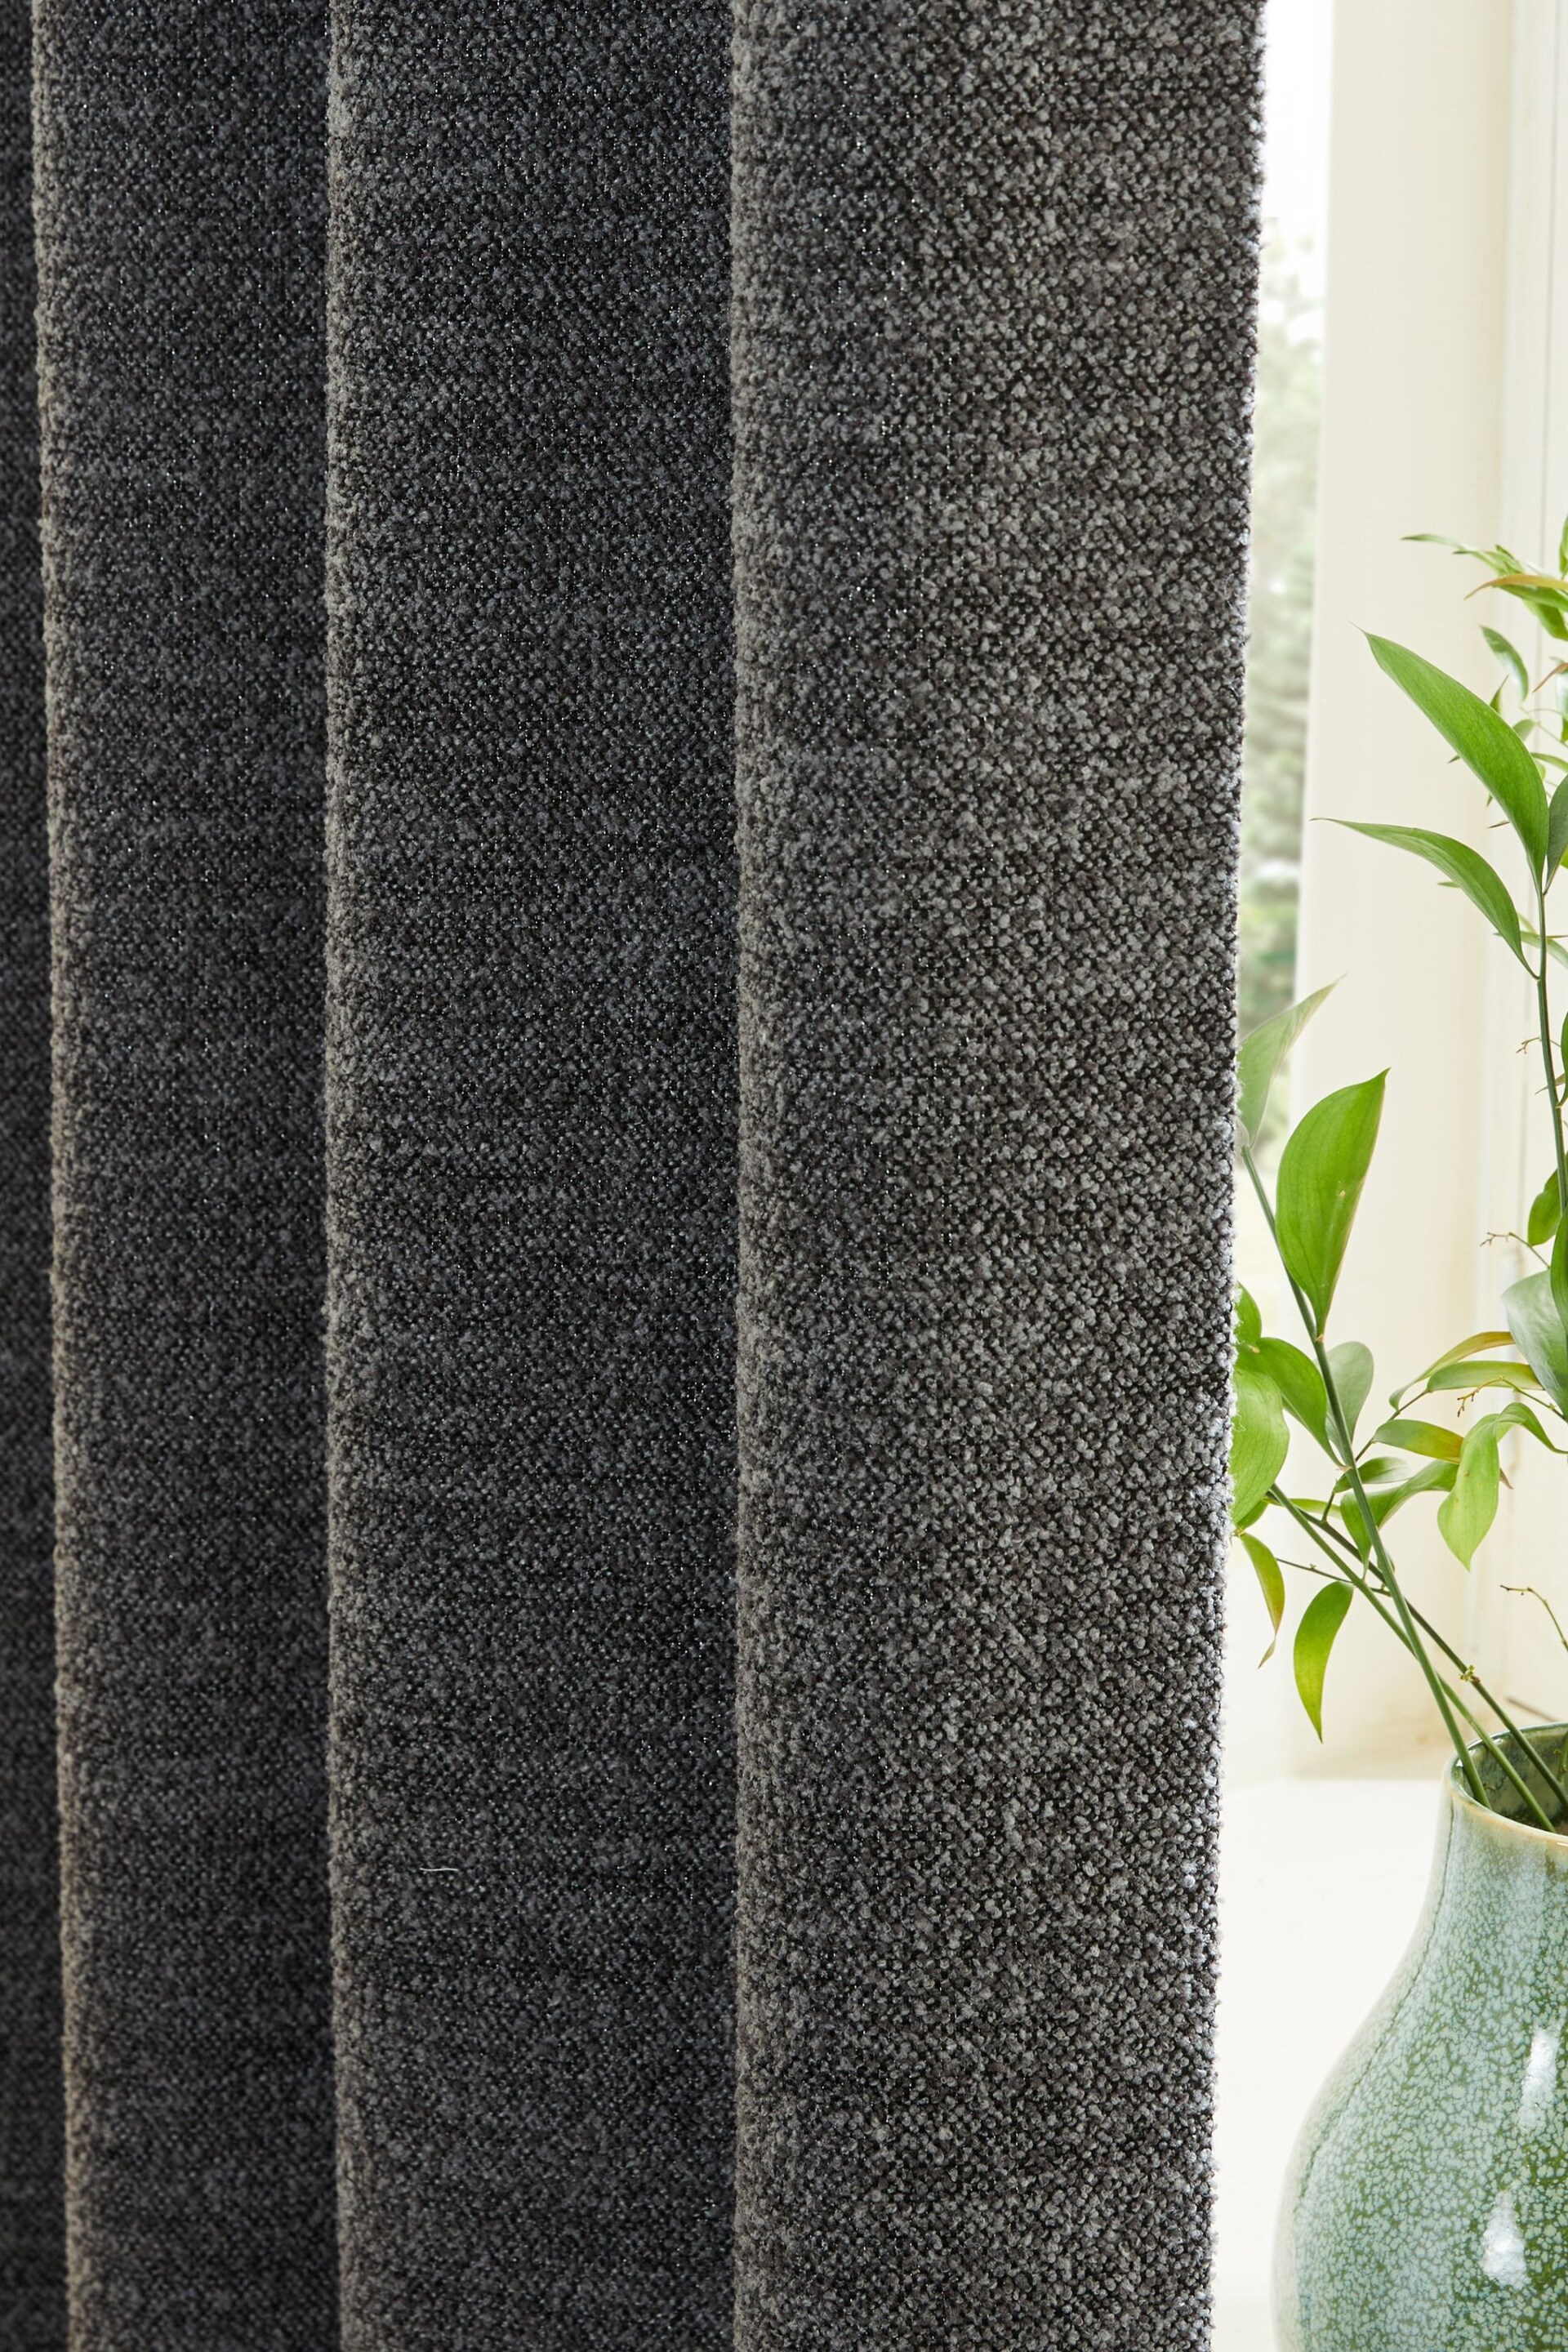 Charcoal Grey Bouclé Textured Lined Curtains - Image 3 of 6